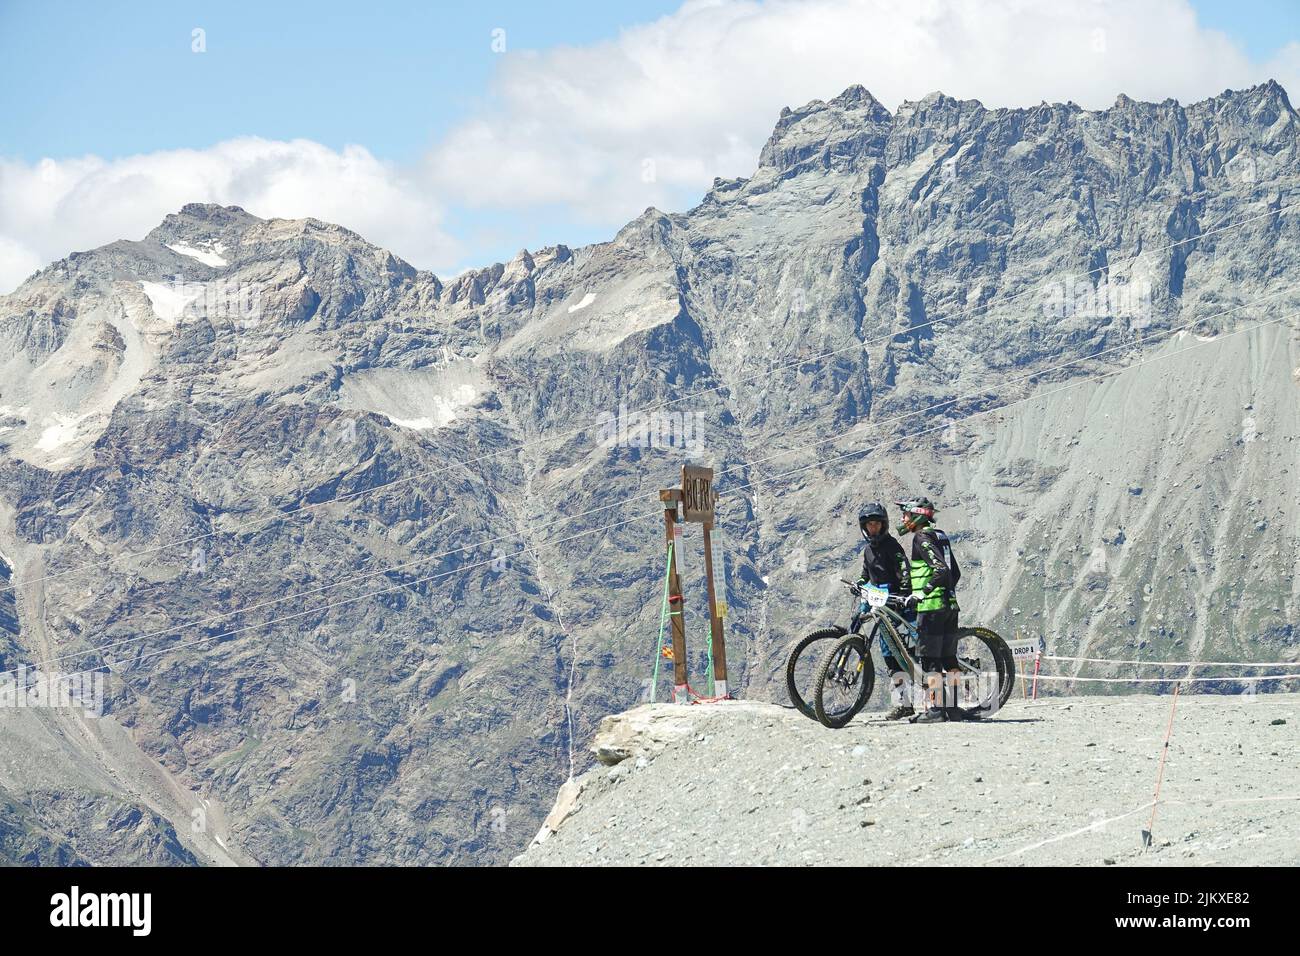 The Matterhorn Valley bike park is the highest in Europe and has slopes with all levels of difficulty.  Breuil-Cervinia, Italy - August 2022 Stock Photo